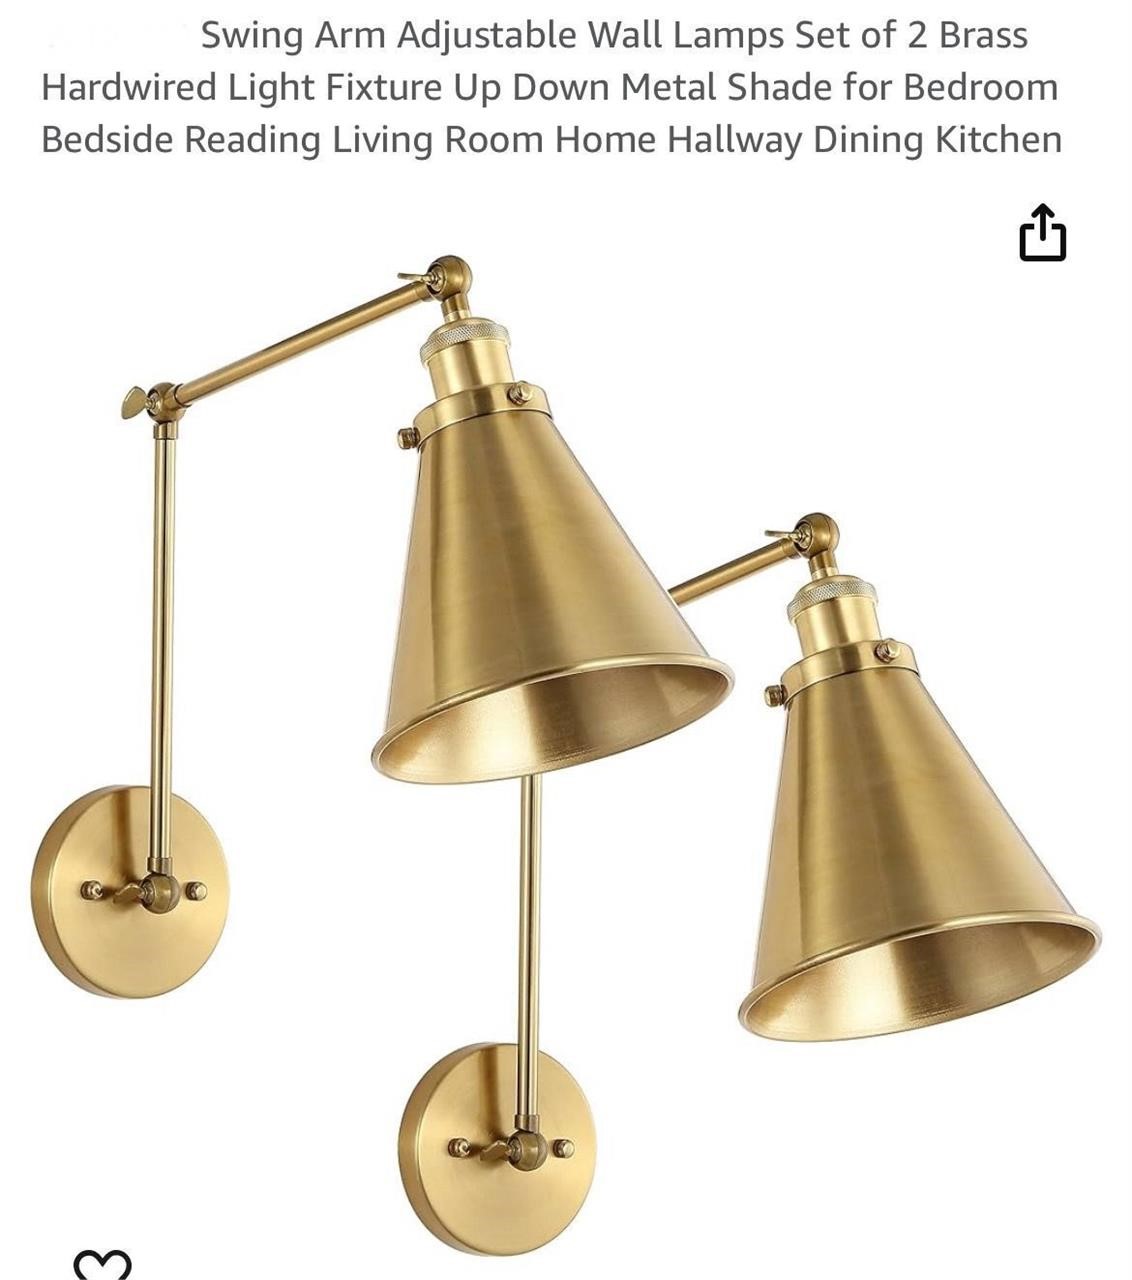 Swing Arm Adjustable Wall Lamps Set of 2 Brass